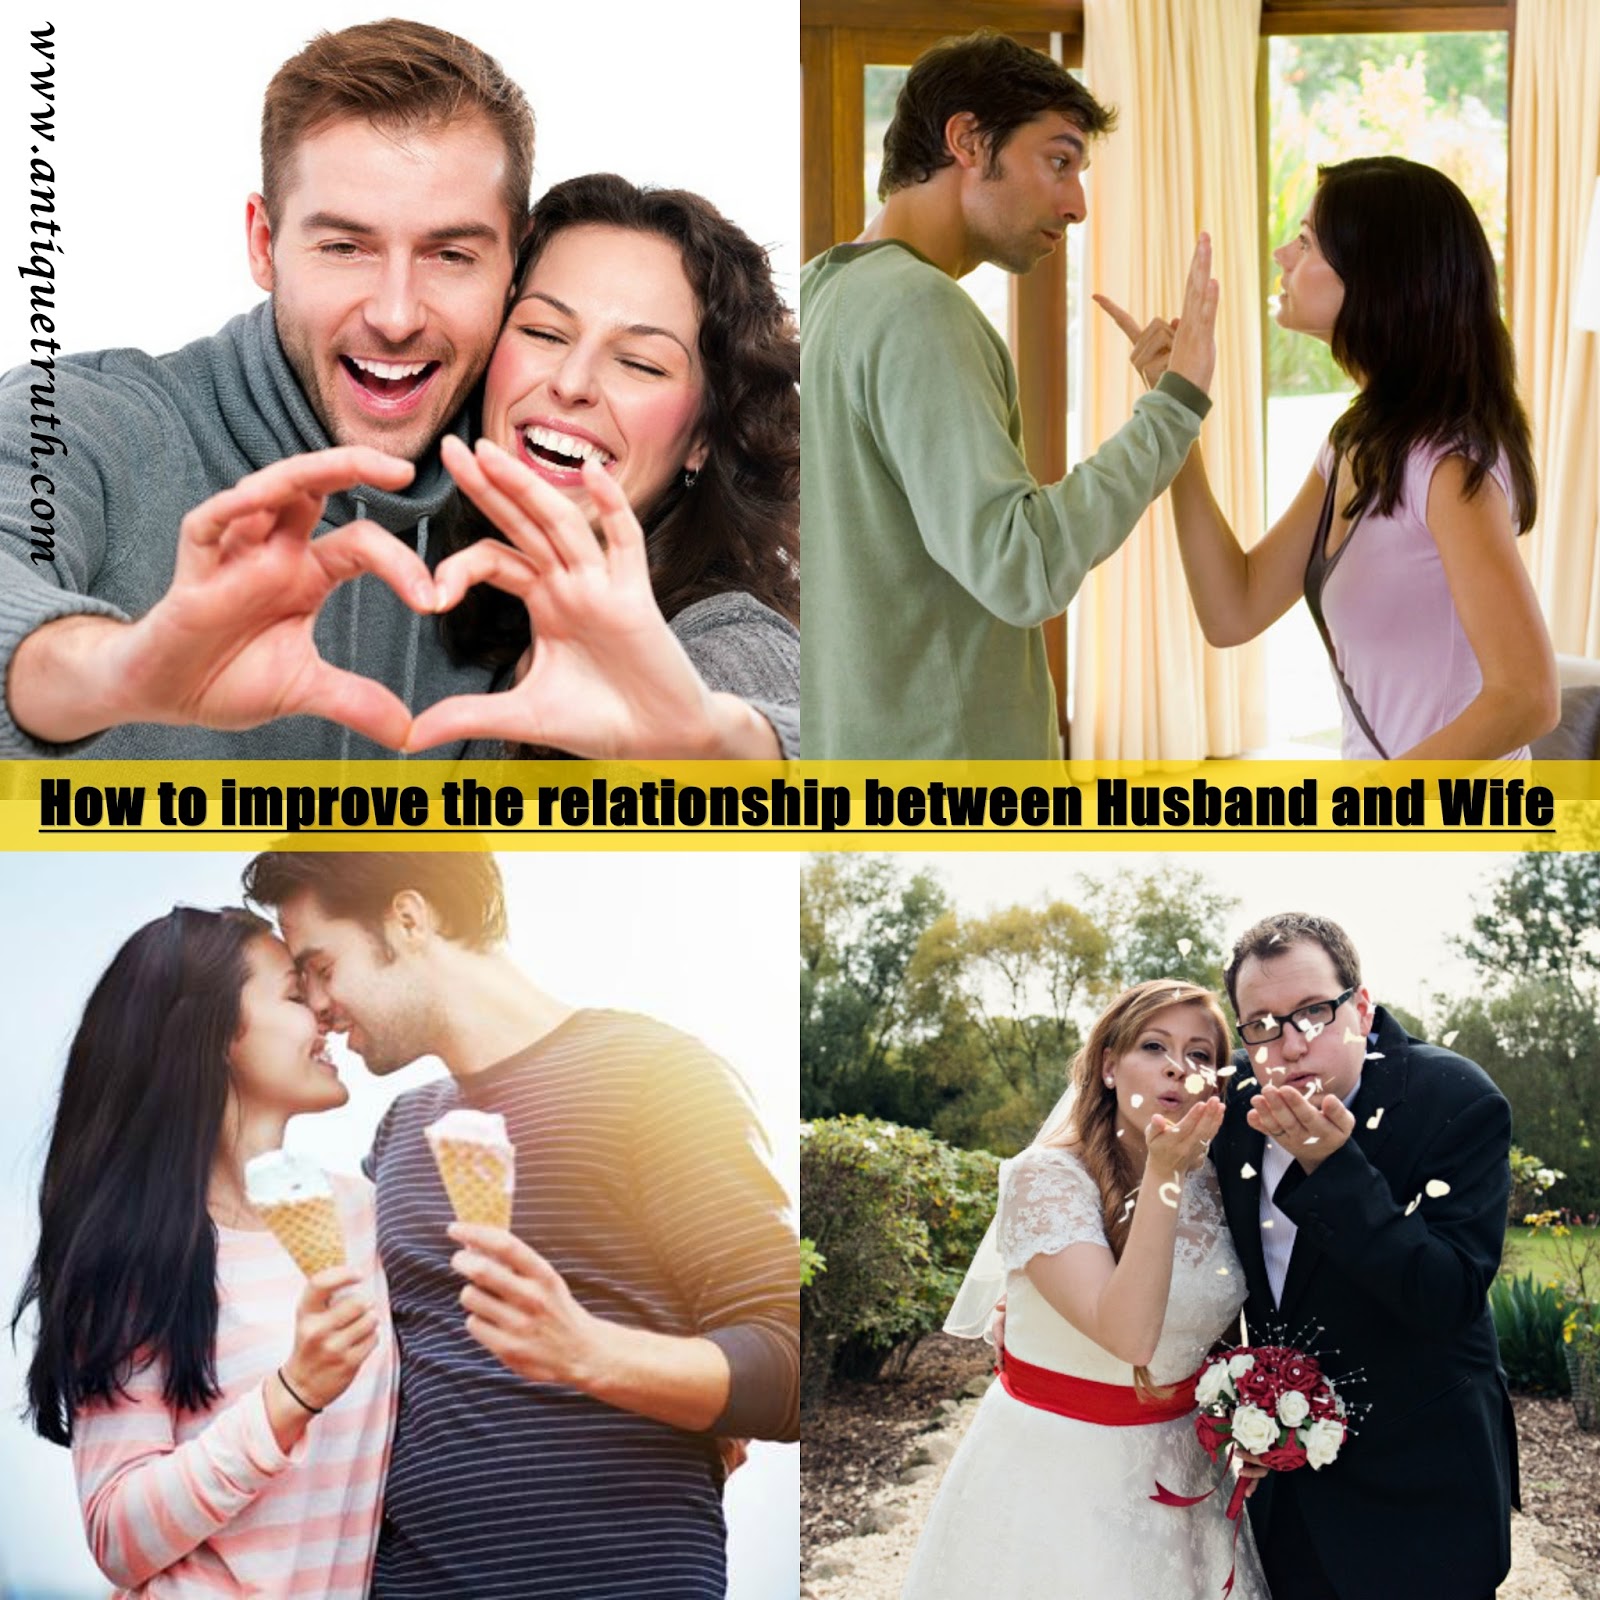 what is the relationship between a husband and wife